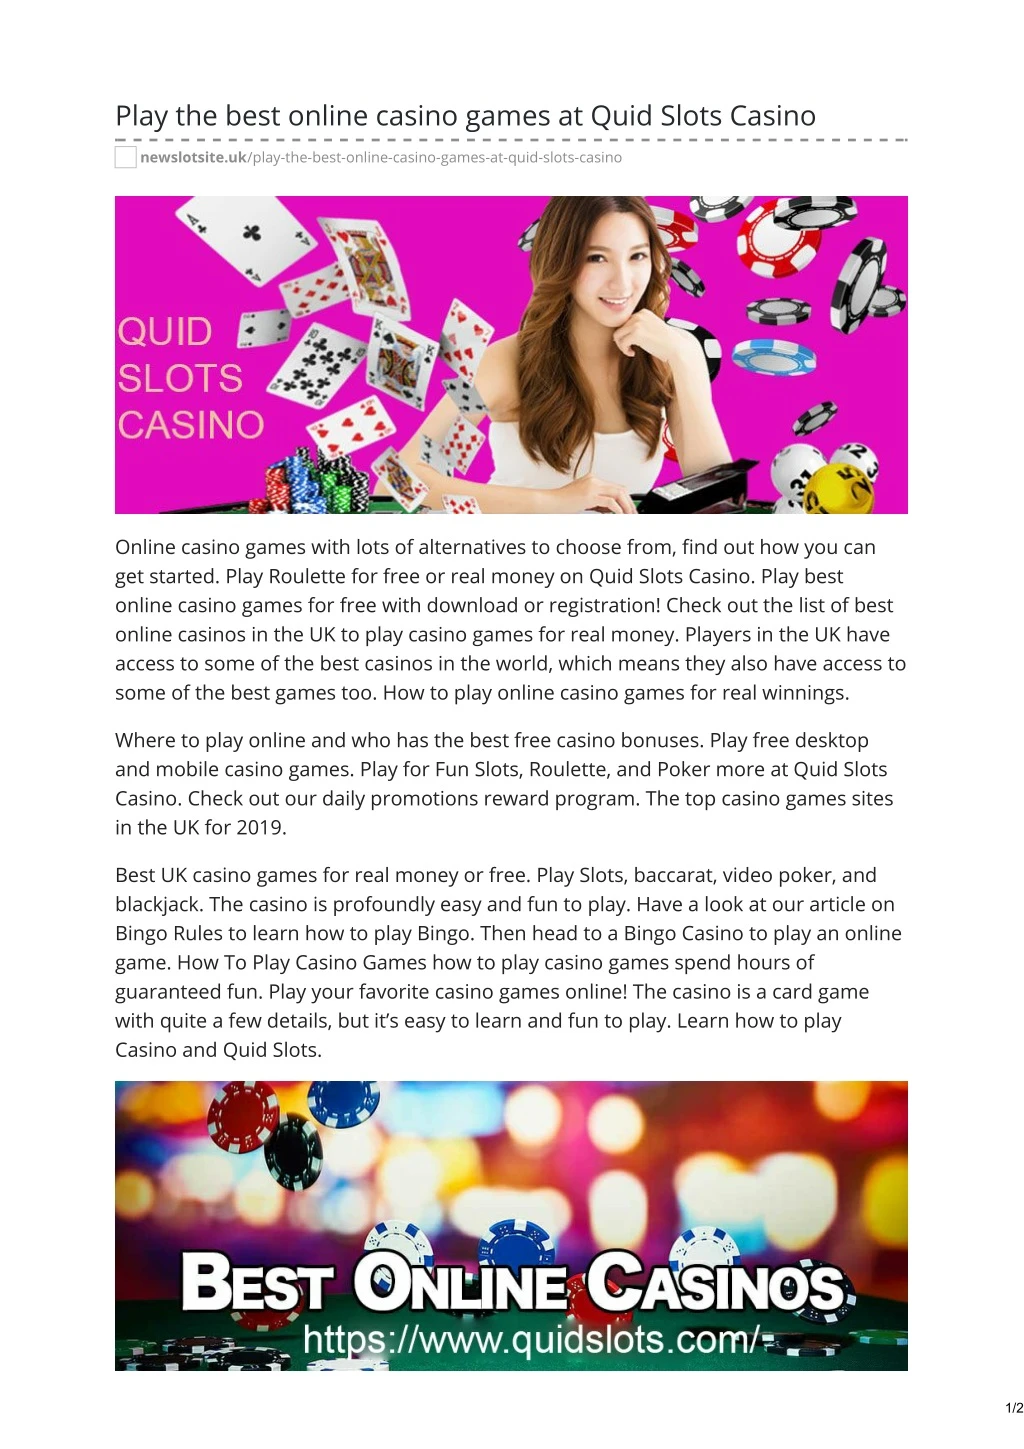 play the best online casino games at quid slots